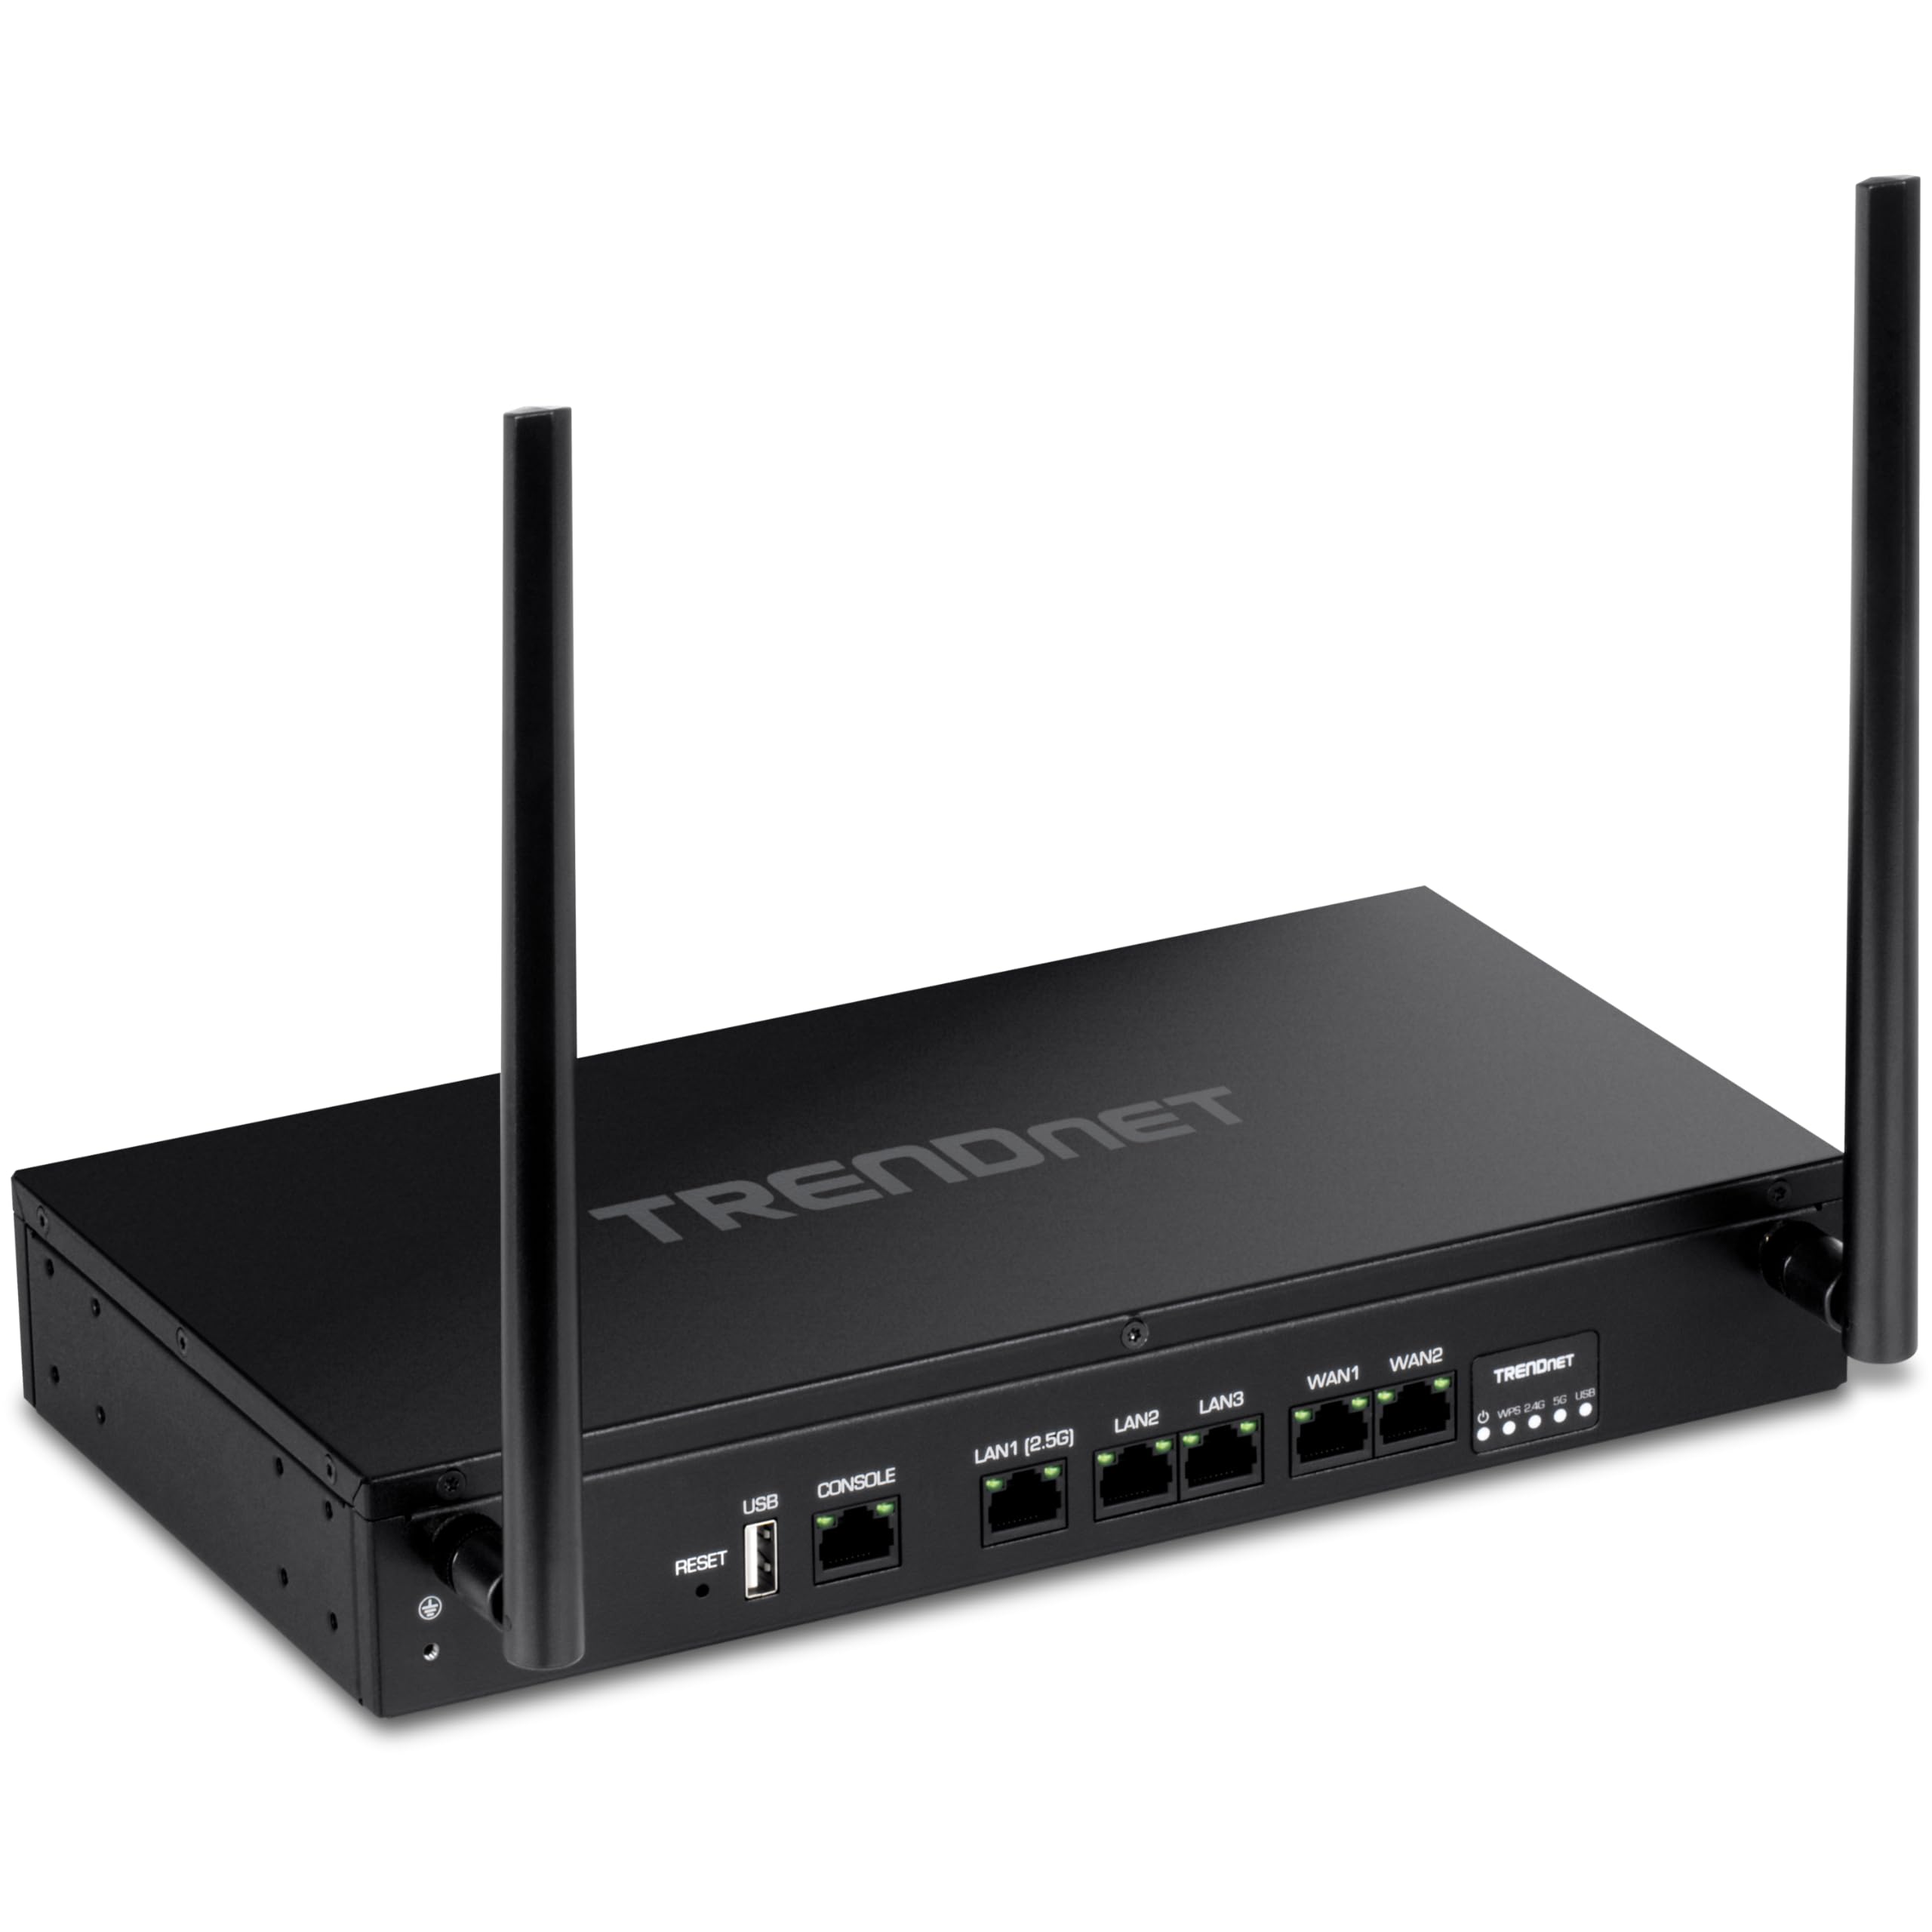 TRENDnet AX1800 Dual-Band WiFi 6 Gigabit Dual-WAN VPN Router, Small Business, Virtual Private Network, Inter-VLAN Routing, QoS, 2.5G Support, Pre-Encrypted Wireless, Black, TEW-929DRU